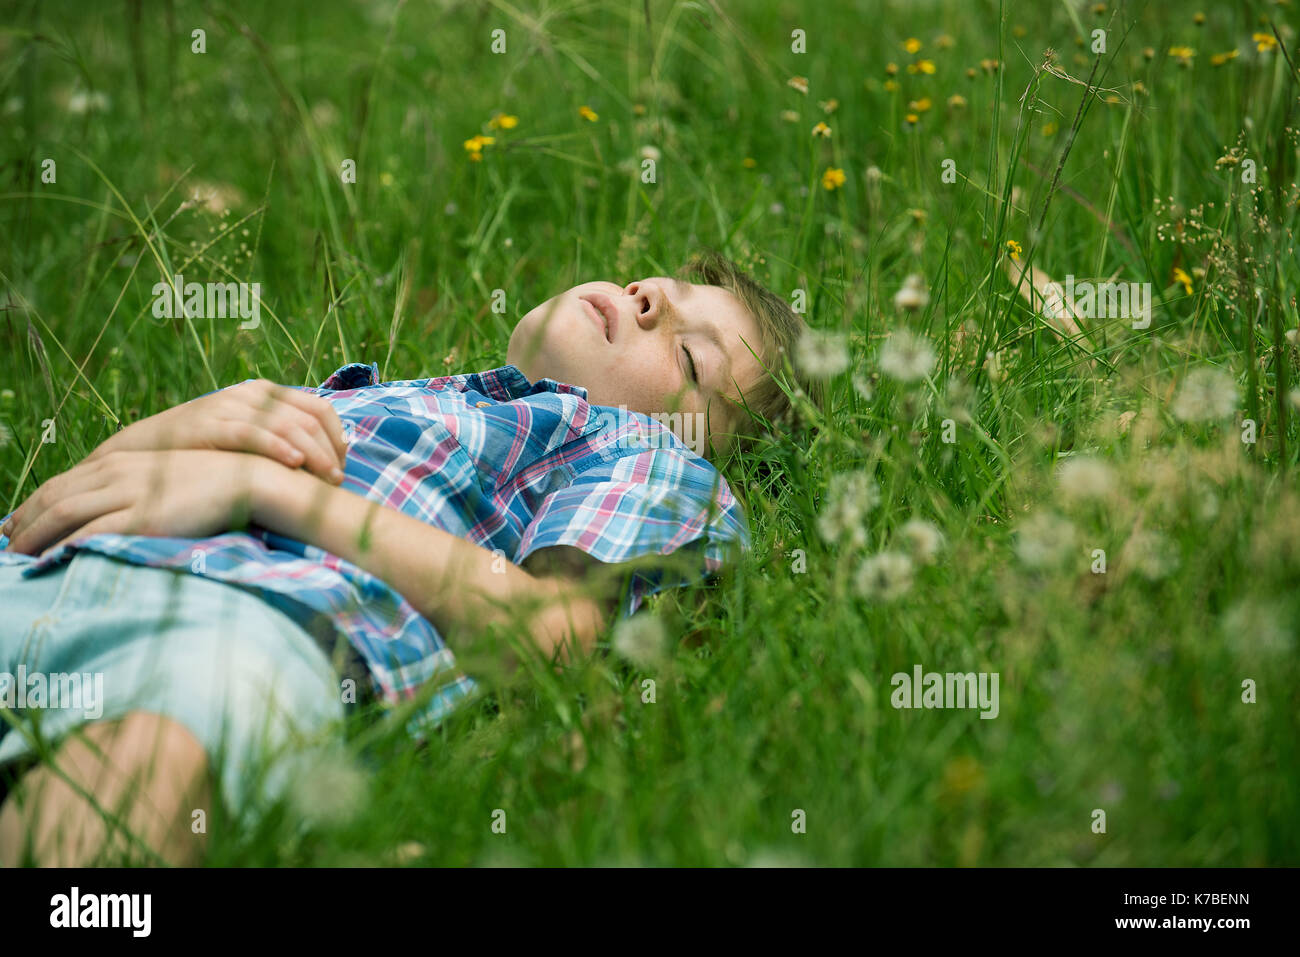 Boy napping on grass Stock Photo